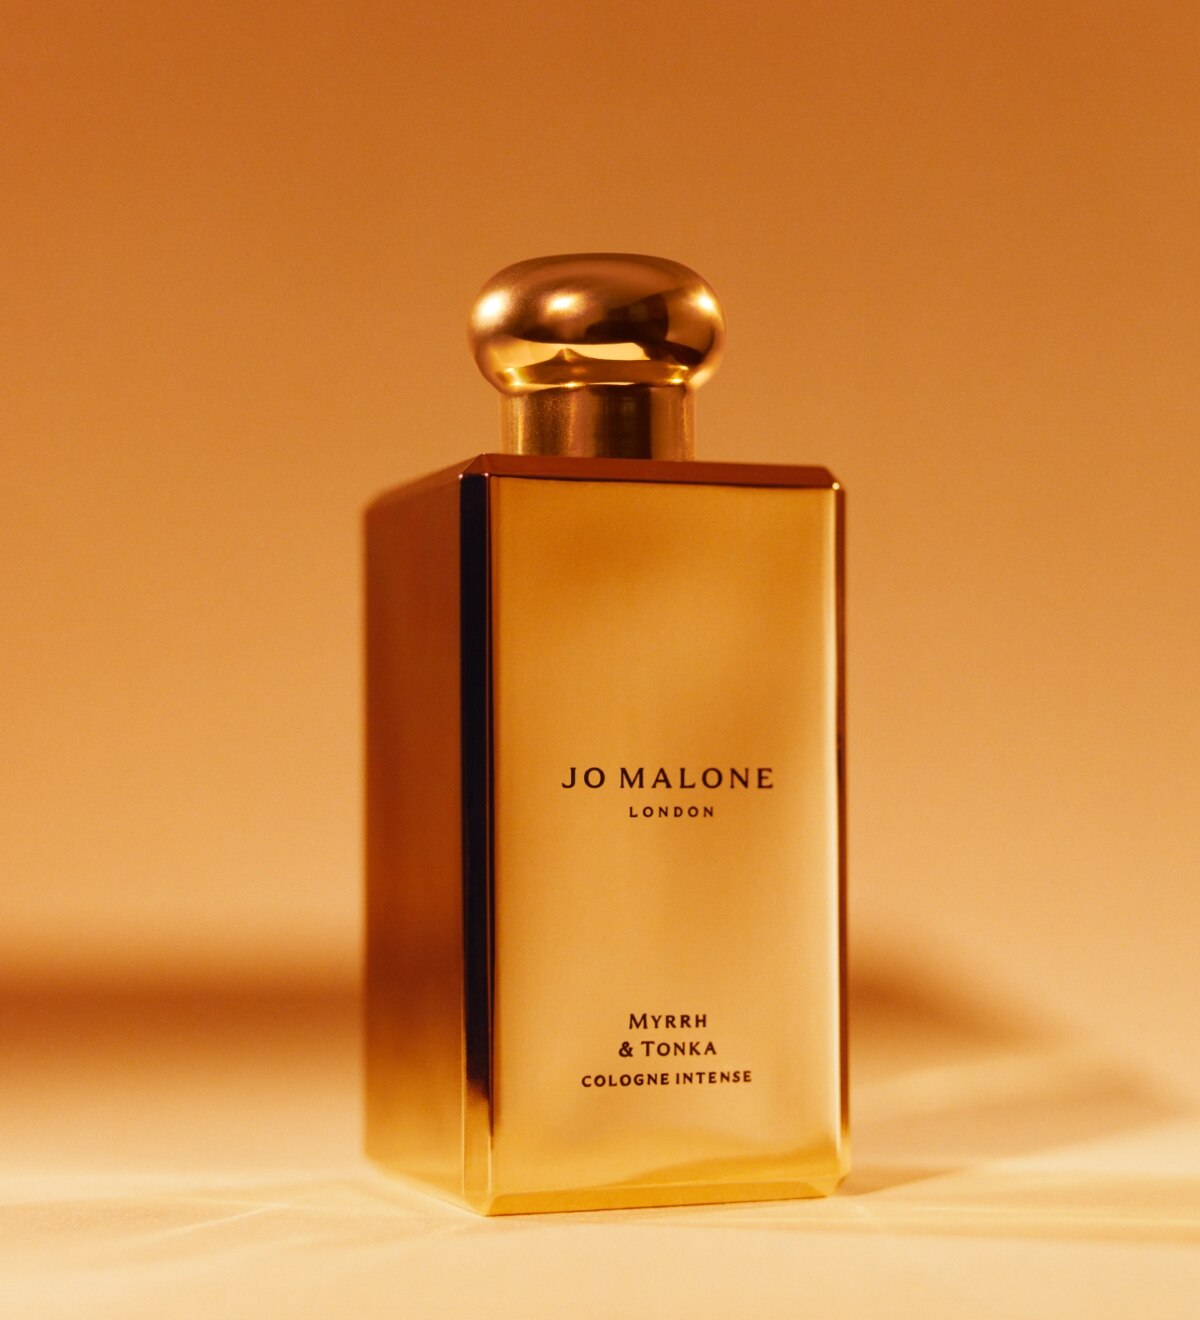 Jo Malone London myrrh & tonka in a special edition gold bottle with gold background